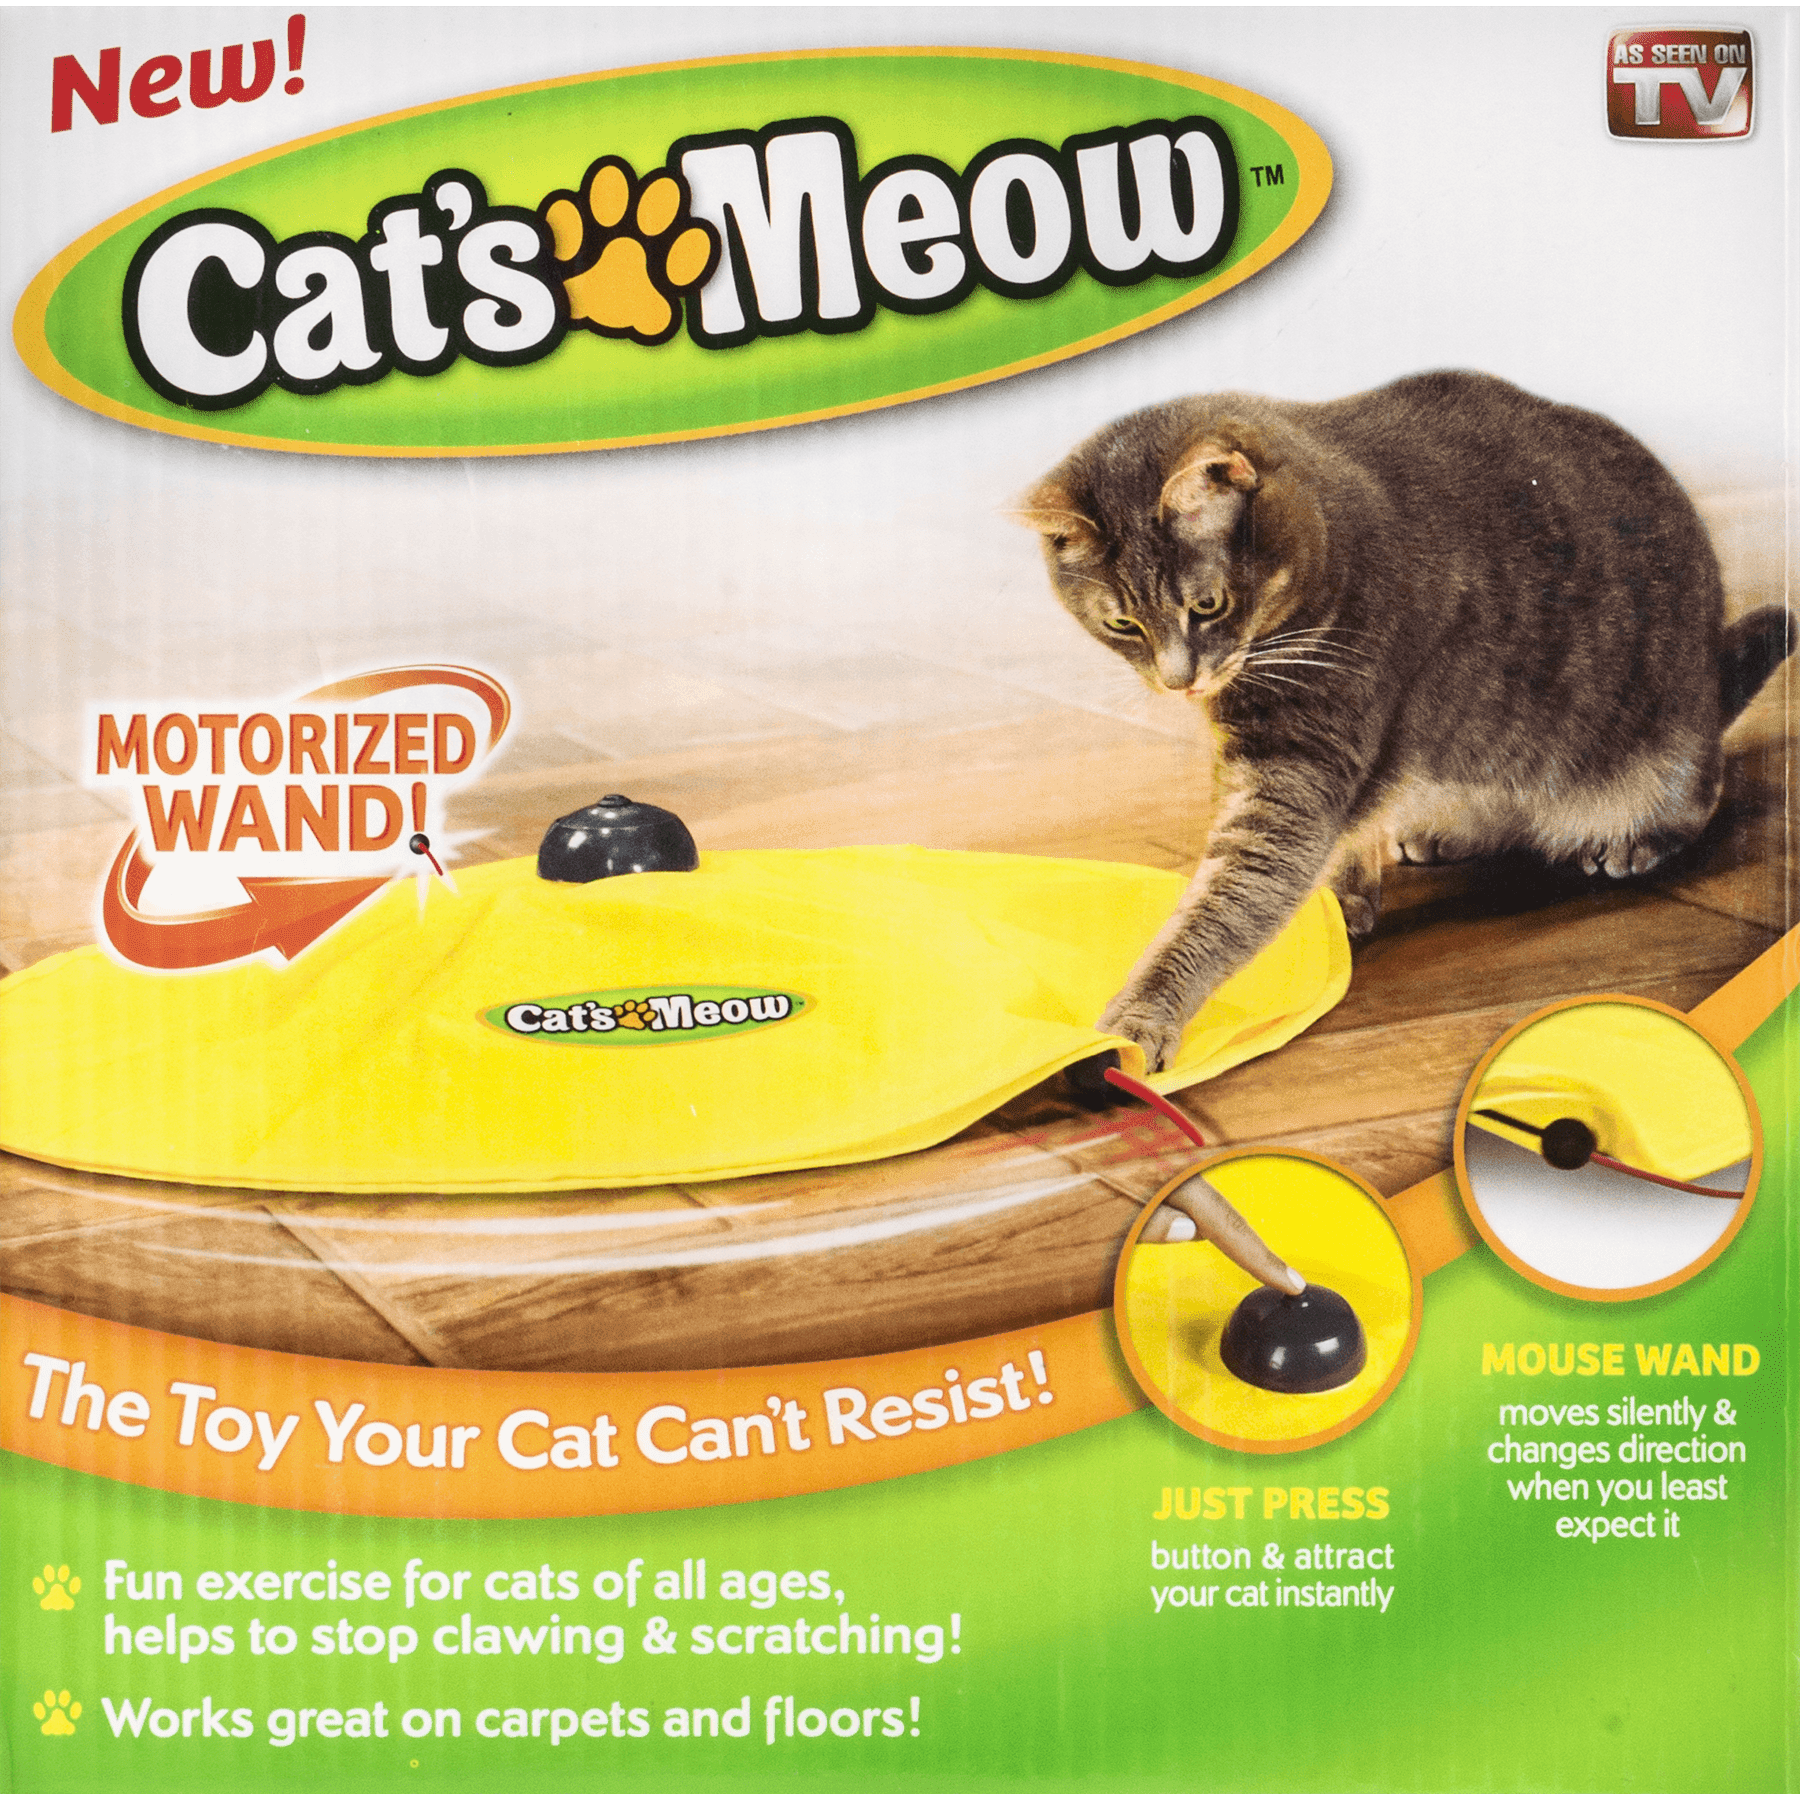 As Seen On TV Cat's Meow Mouse Wand Toy 